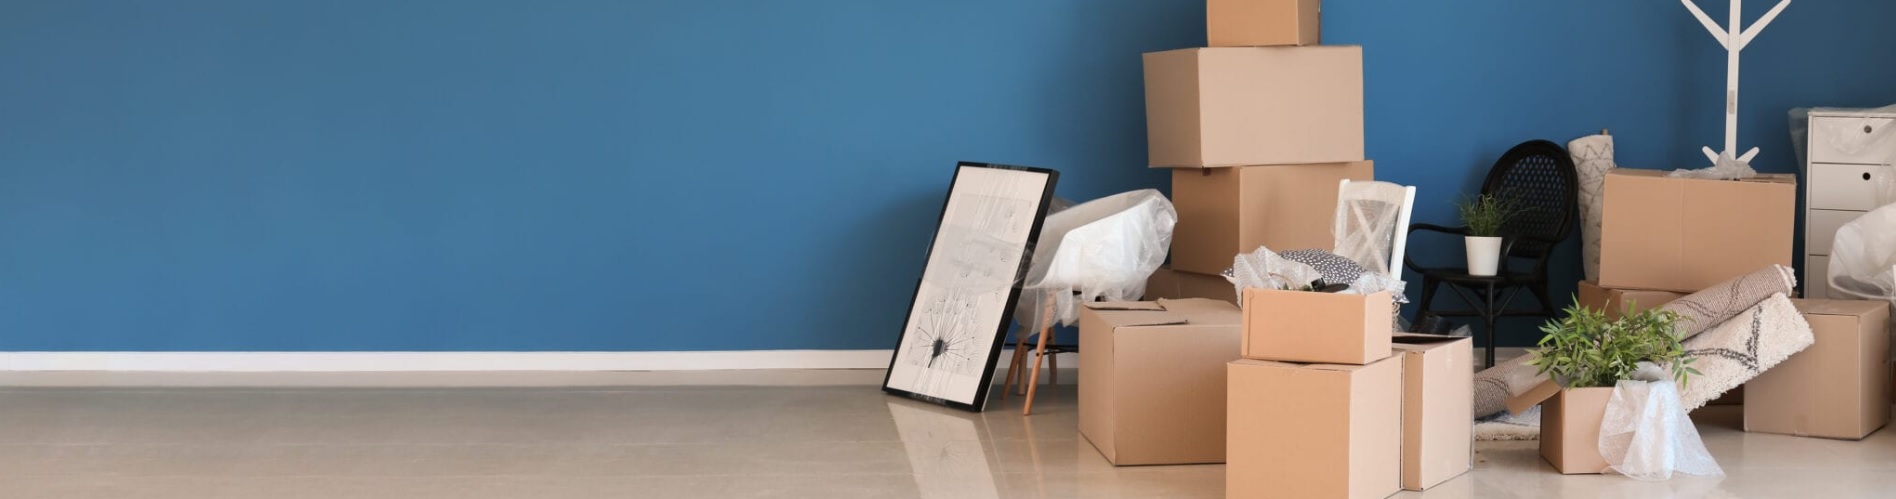 5 things to do before vacating a rental